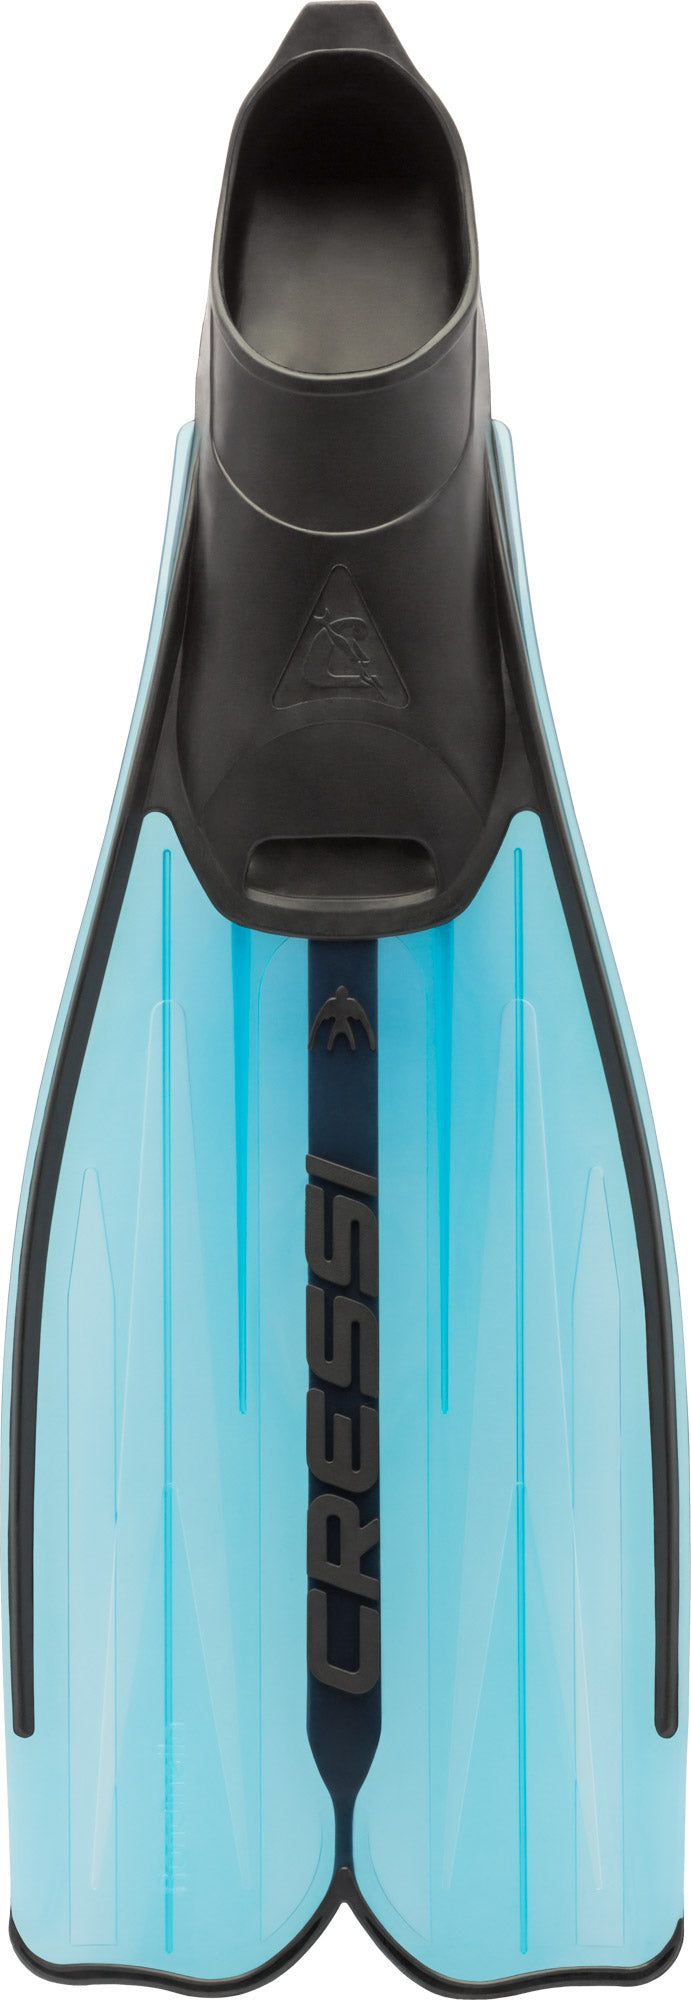 Cressi Full Foot Pocket Fins for Adults, Good Thrust, Light Fin, Rondinella - Designed and Made in Italy